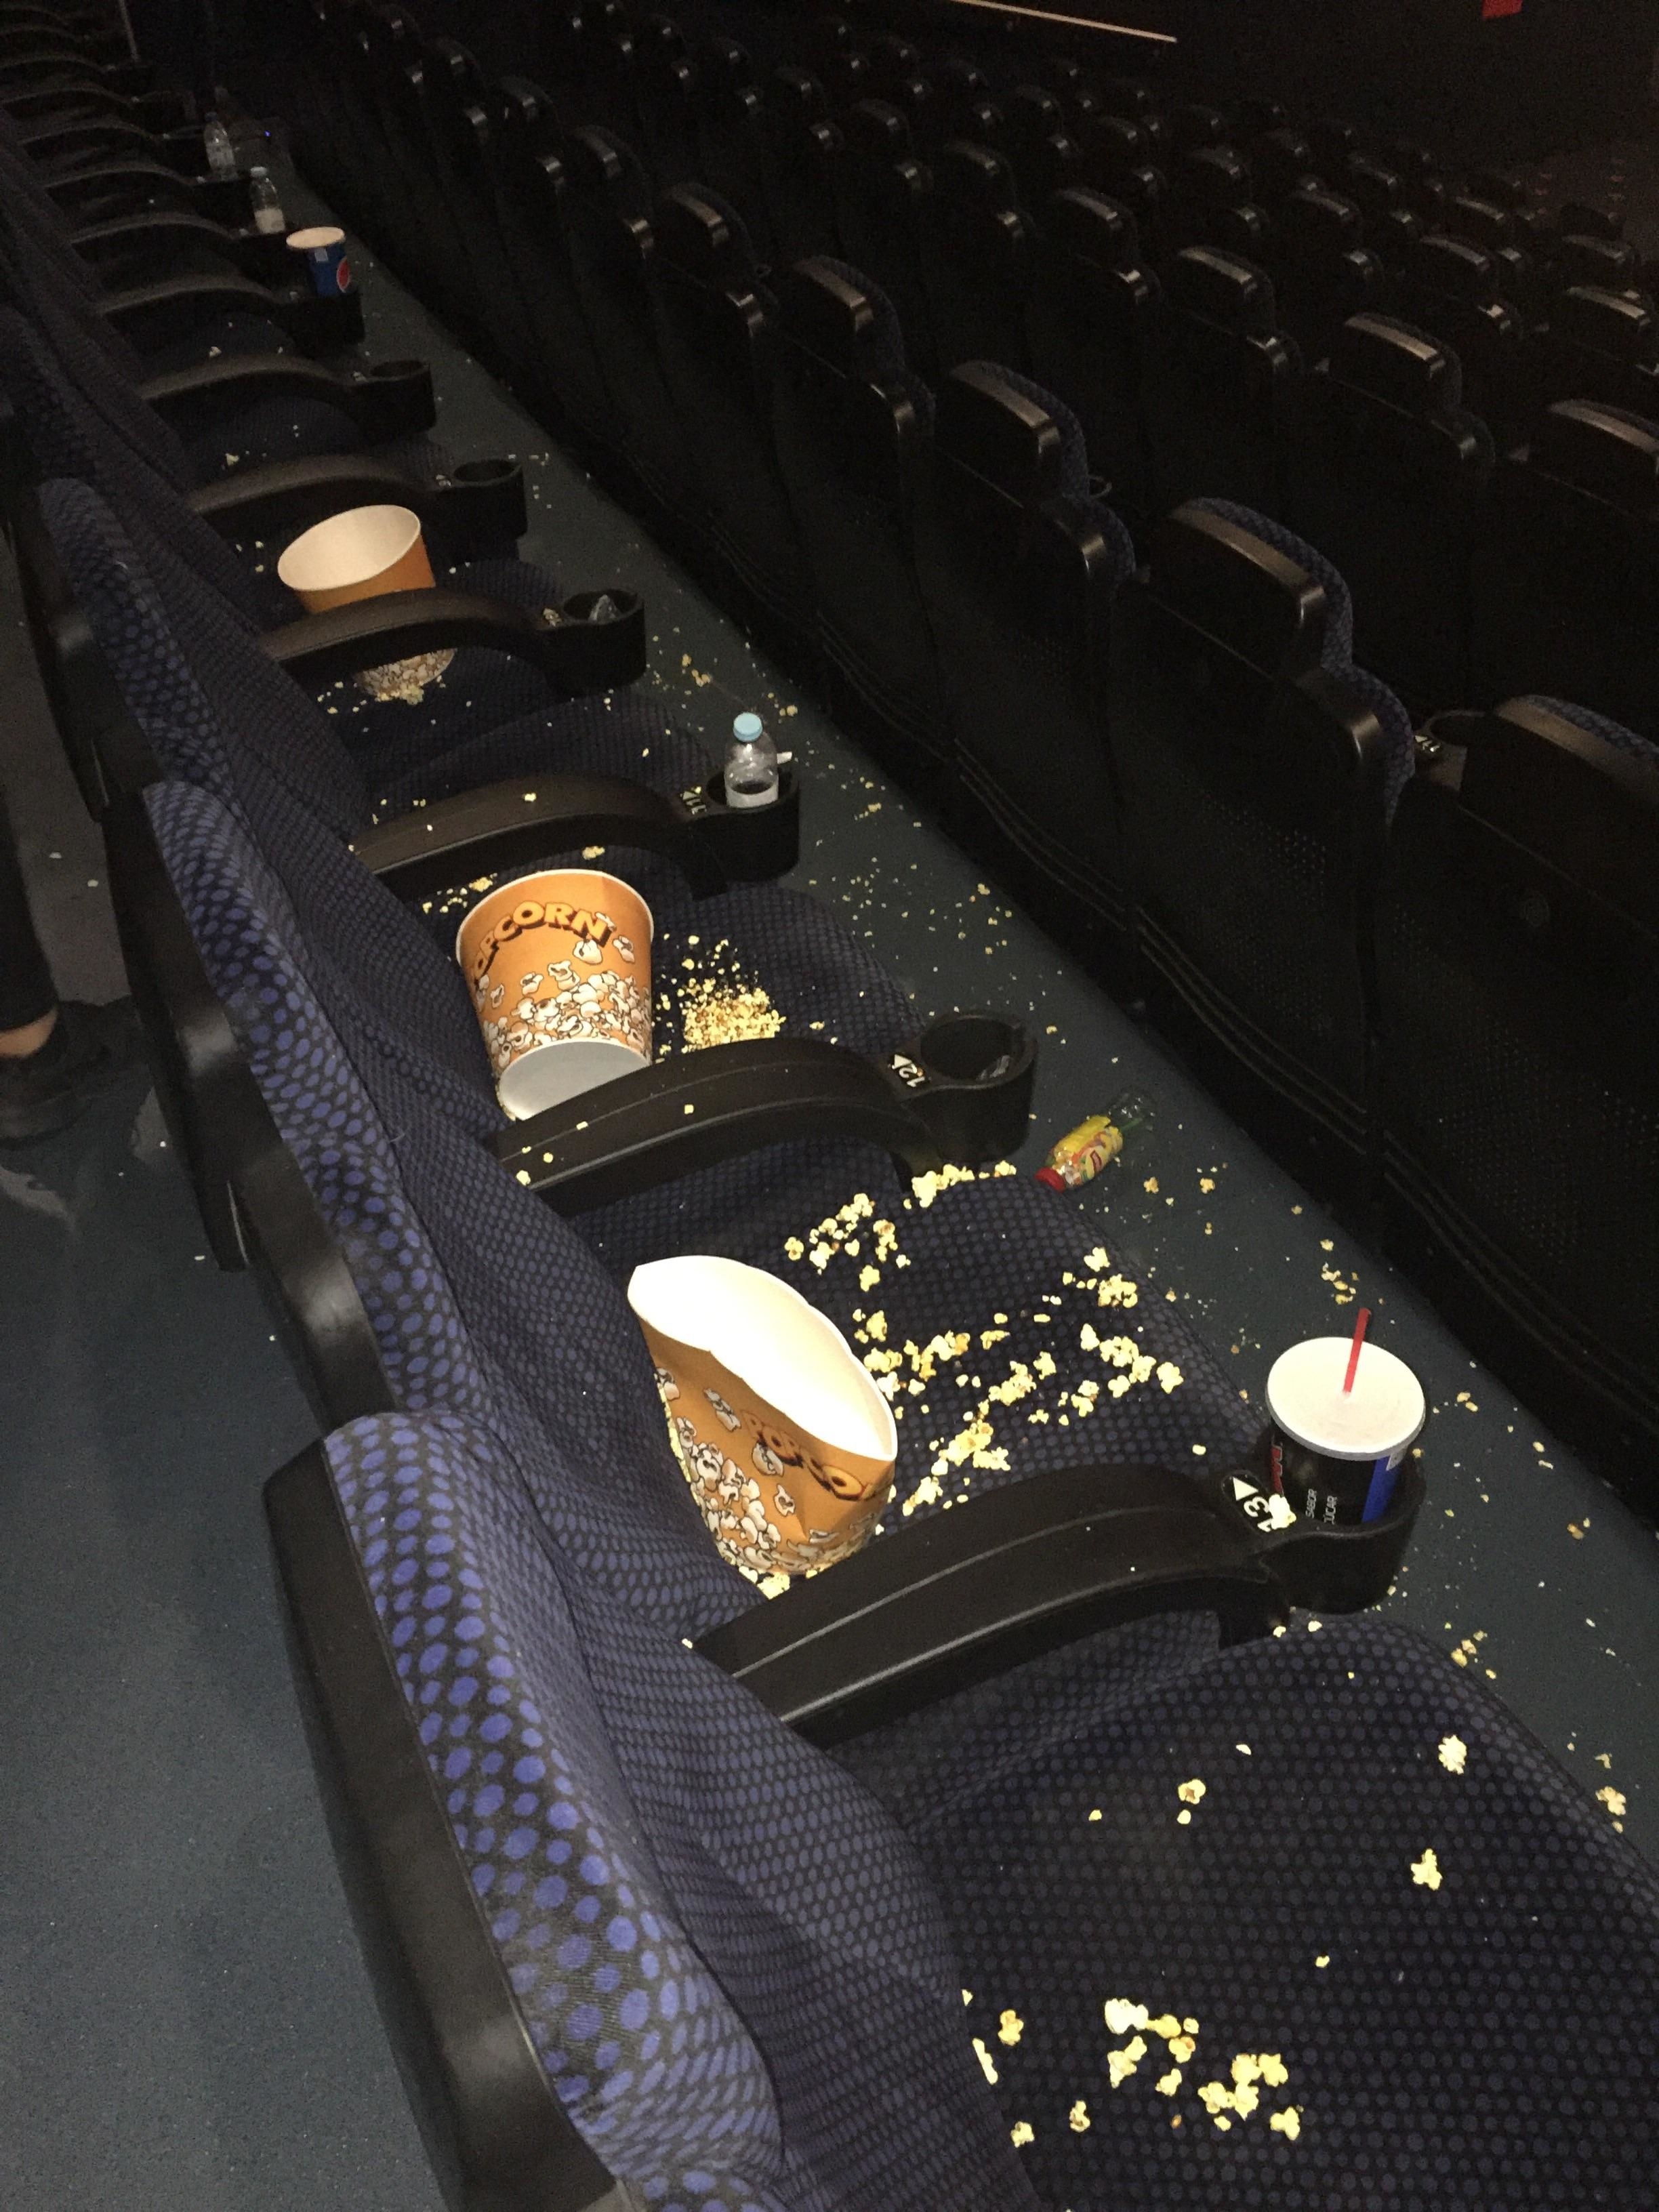 Movie theater aisle with spilled popcorn and drinks on the floor